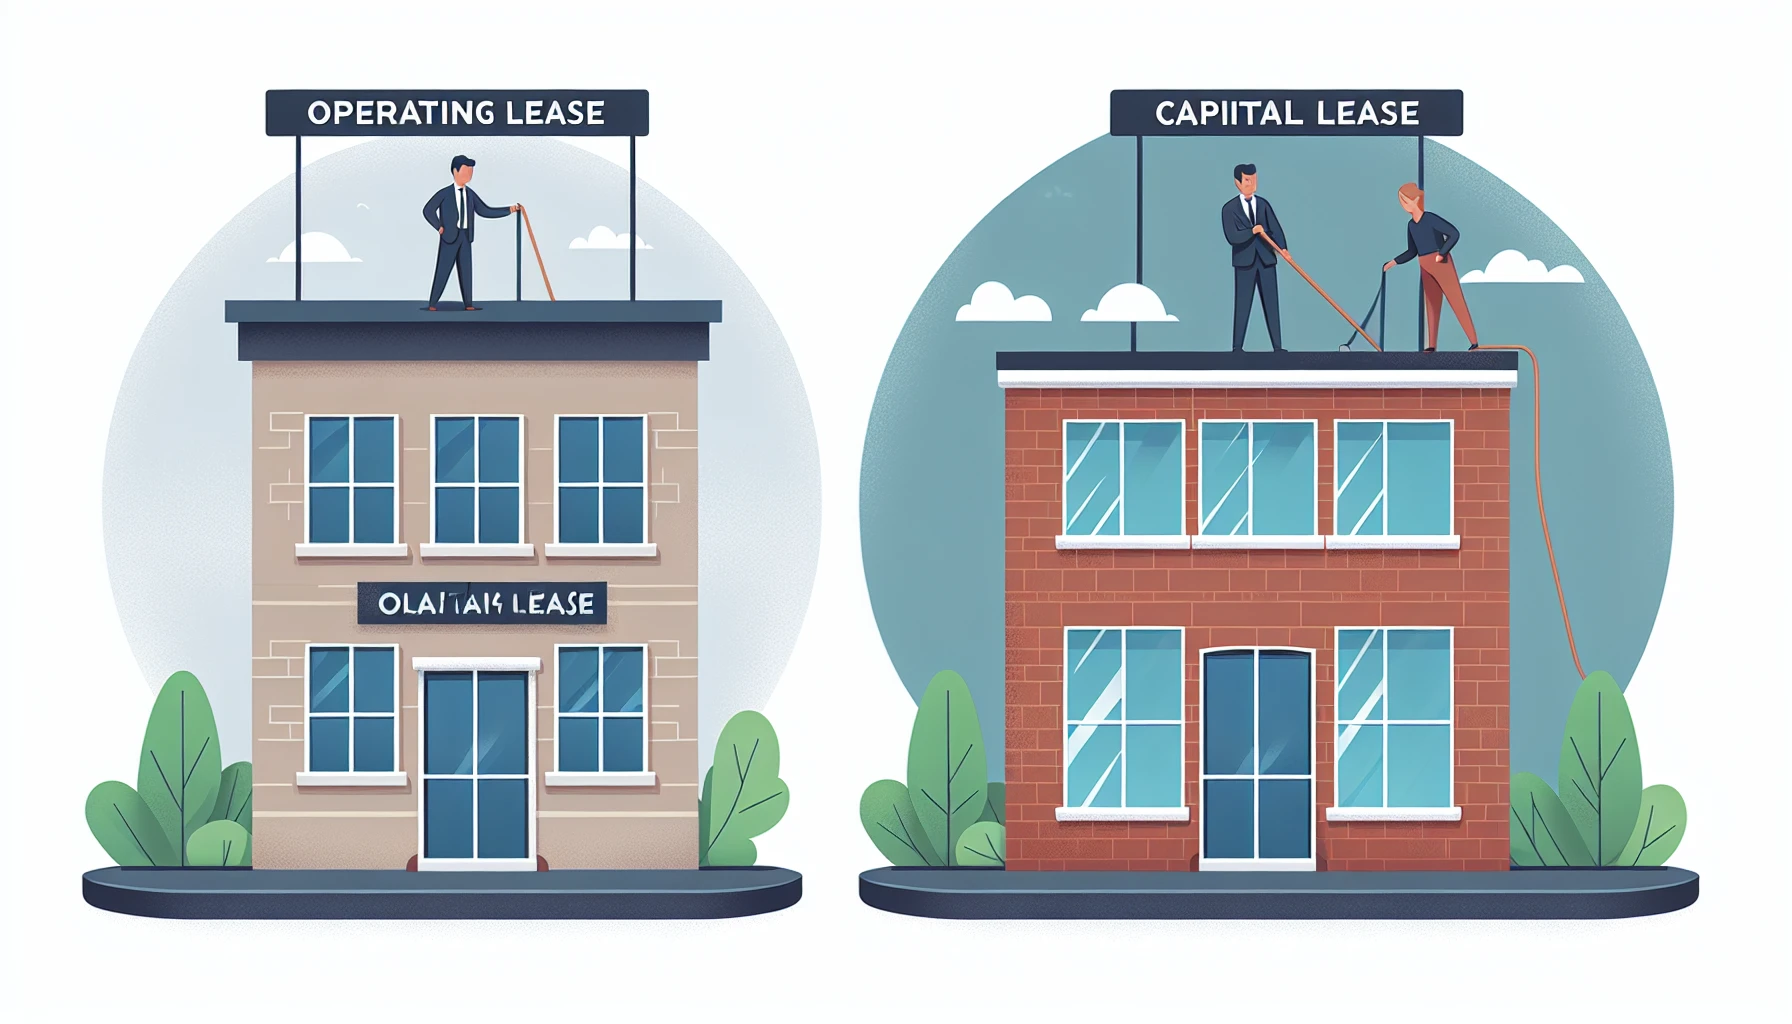 Comparison between operating and capital leases